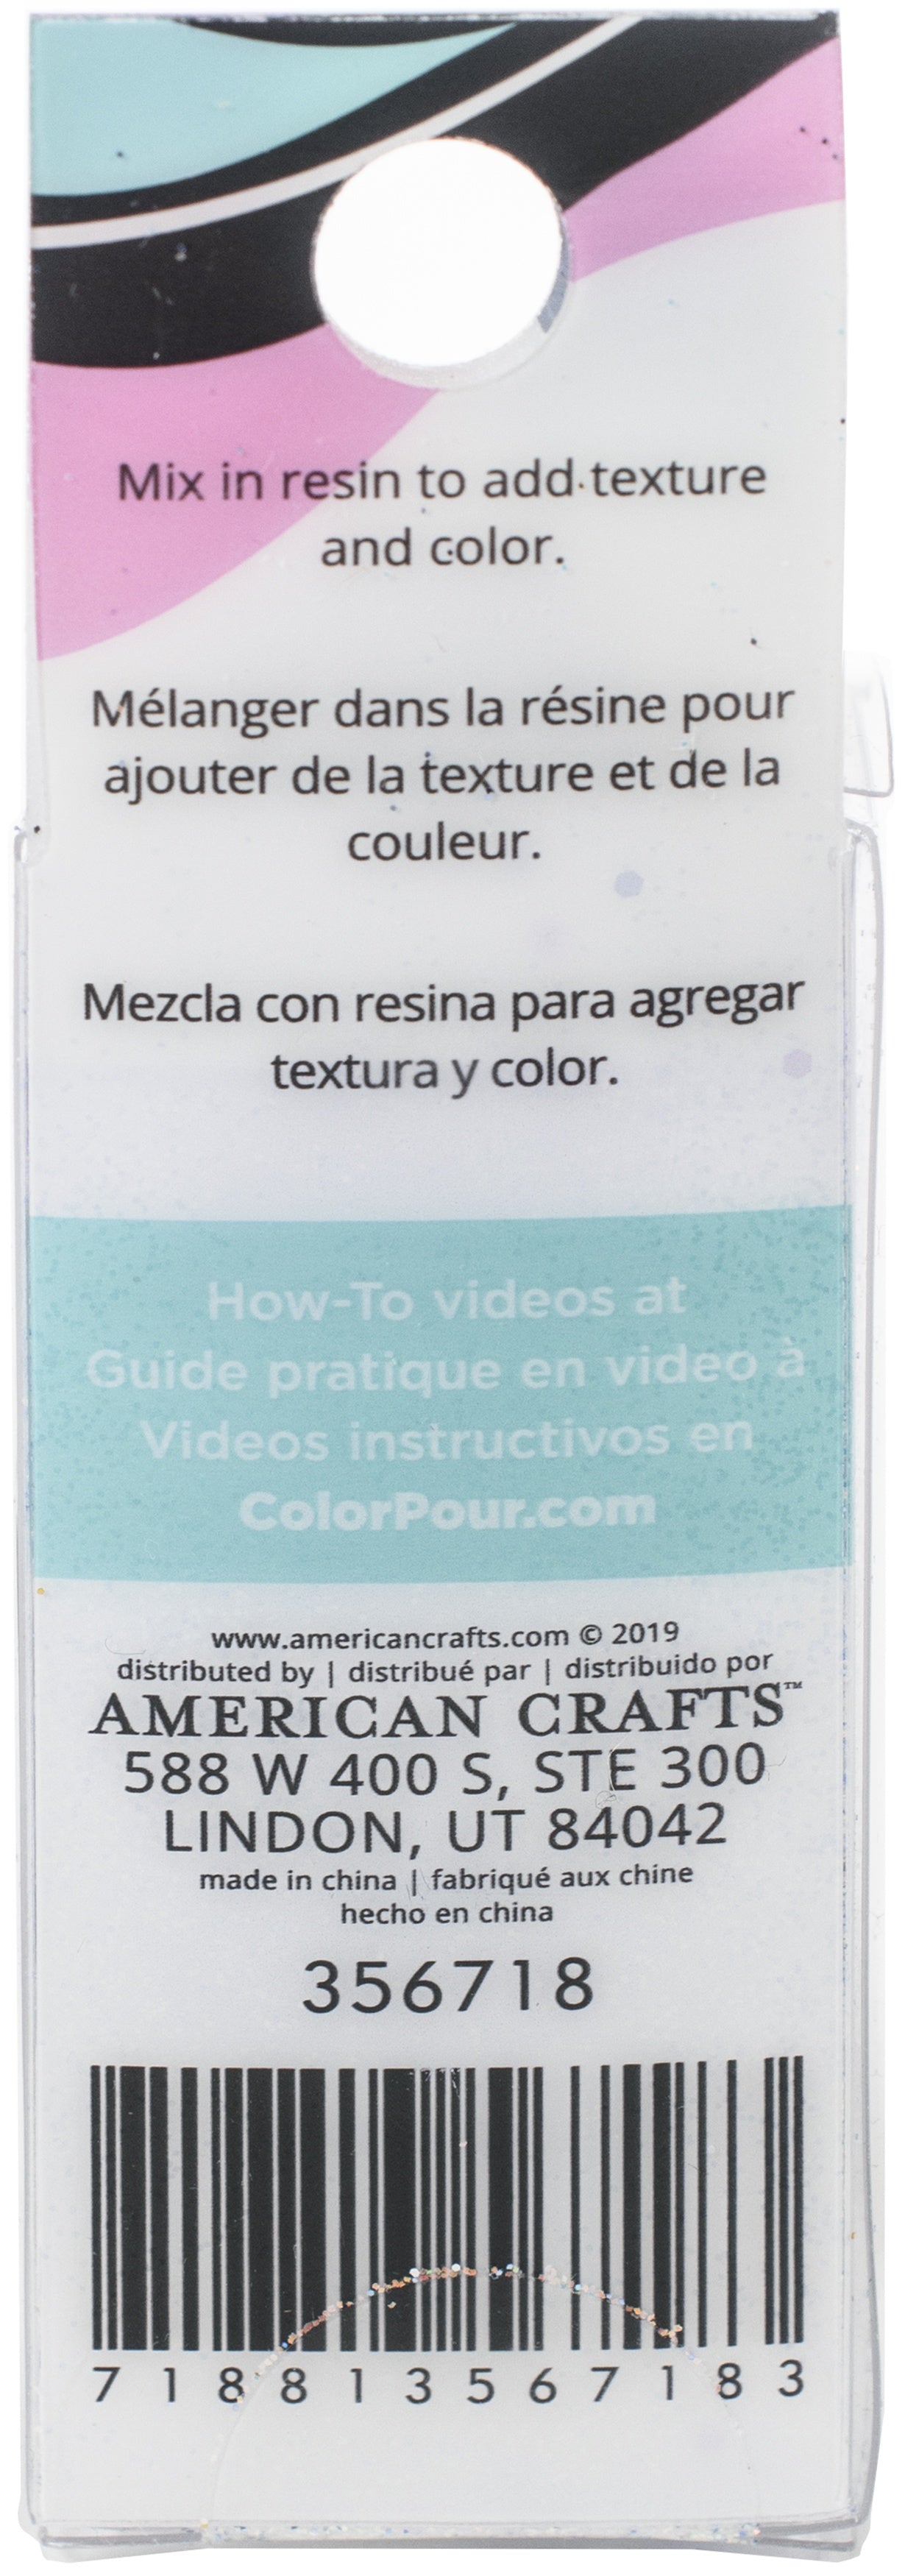 American Crafts Color Pour Resin Mix Ins Geode Violet Black Iridescent Turquoi